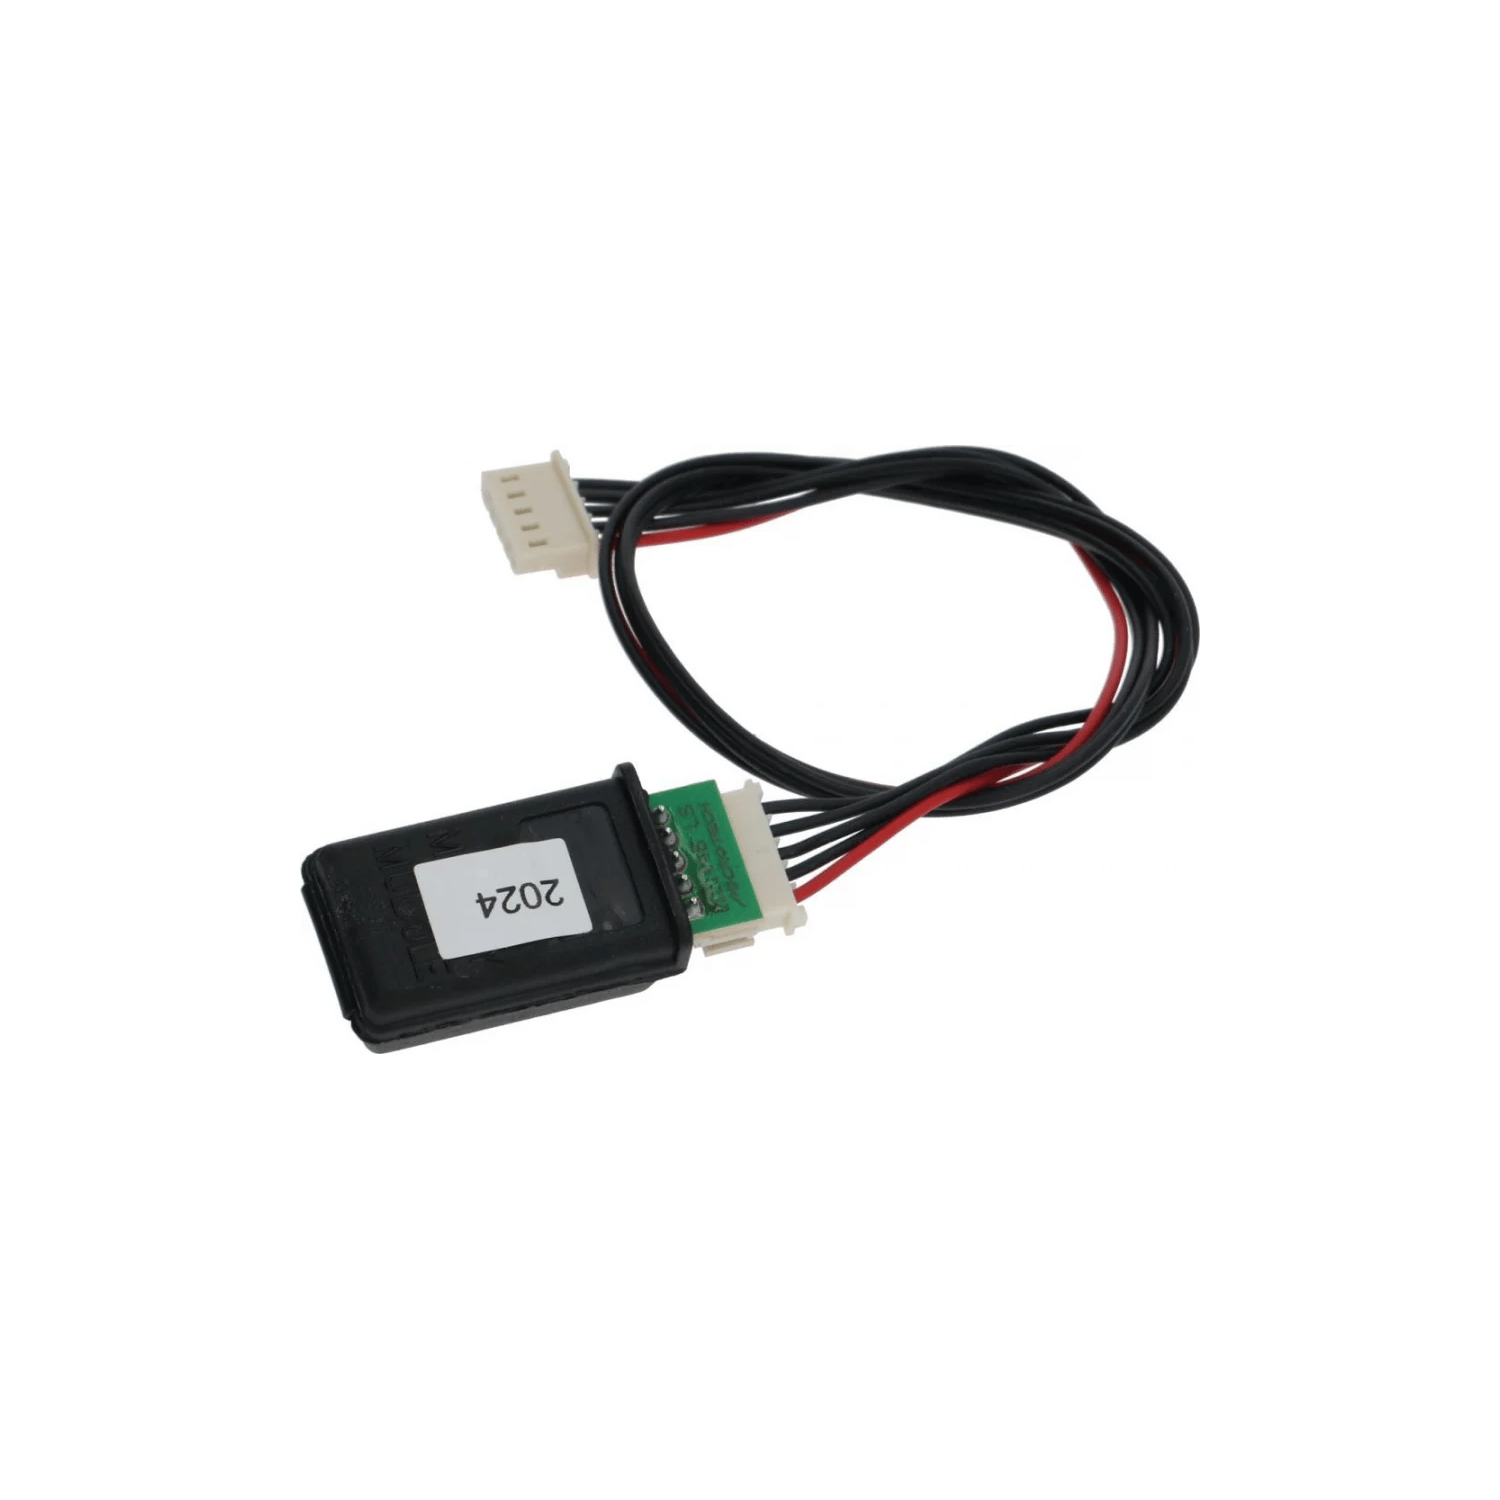 Copy Card for Quick Programming, Eliwell MW320500